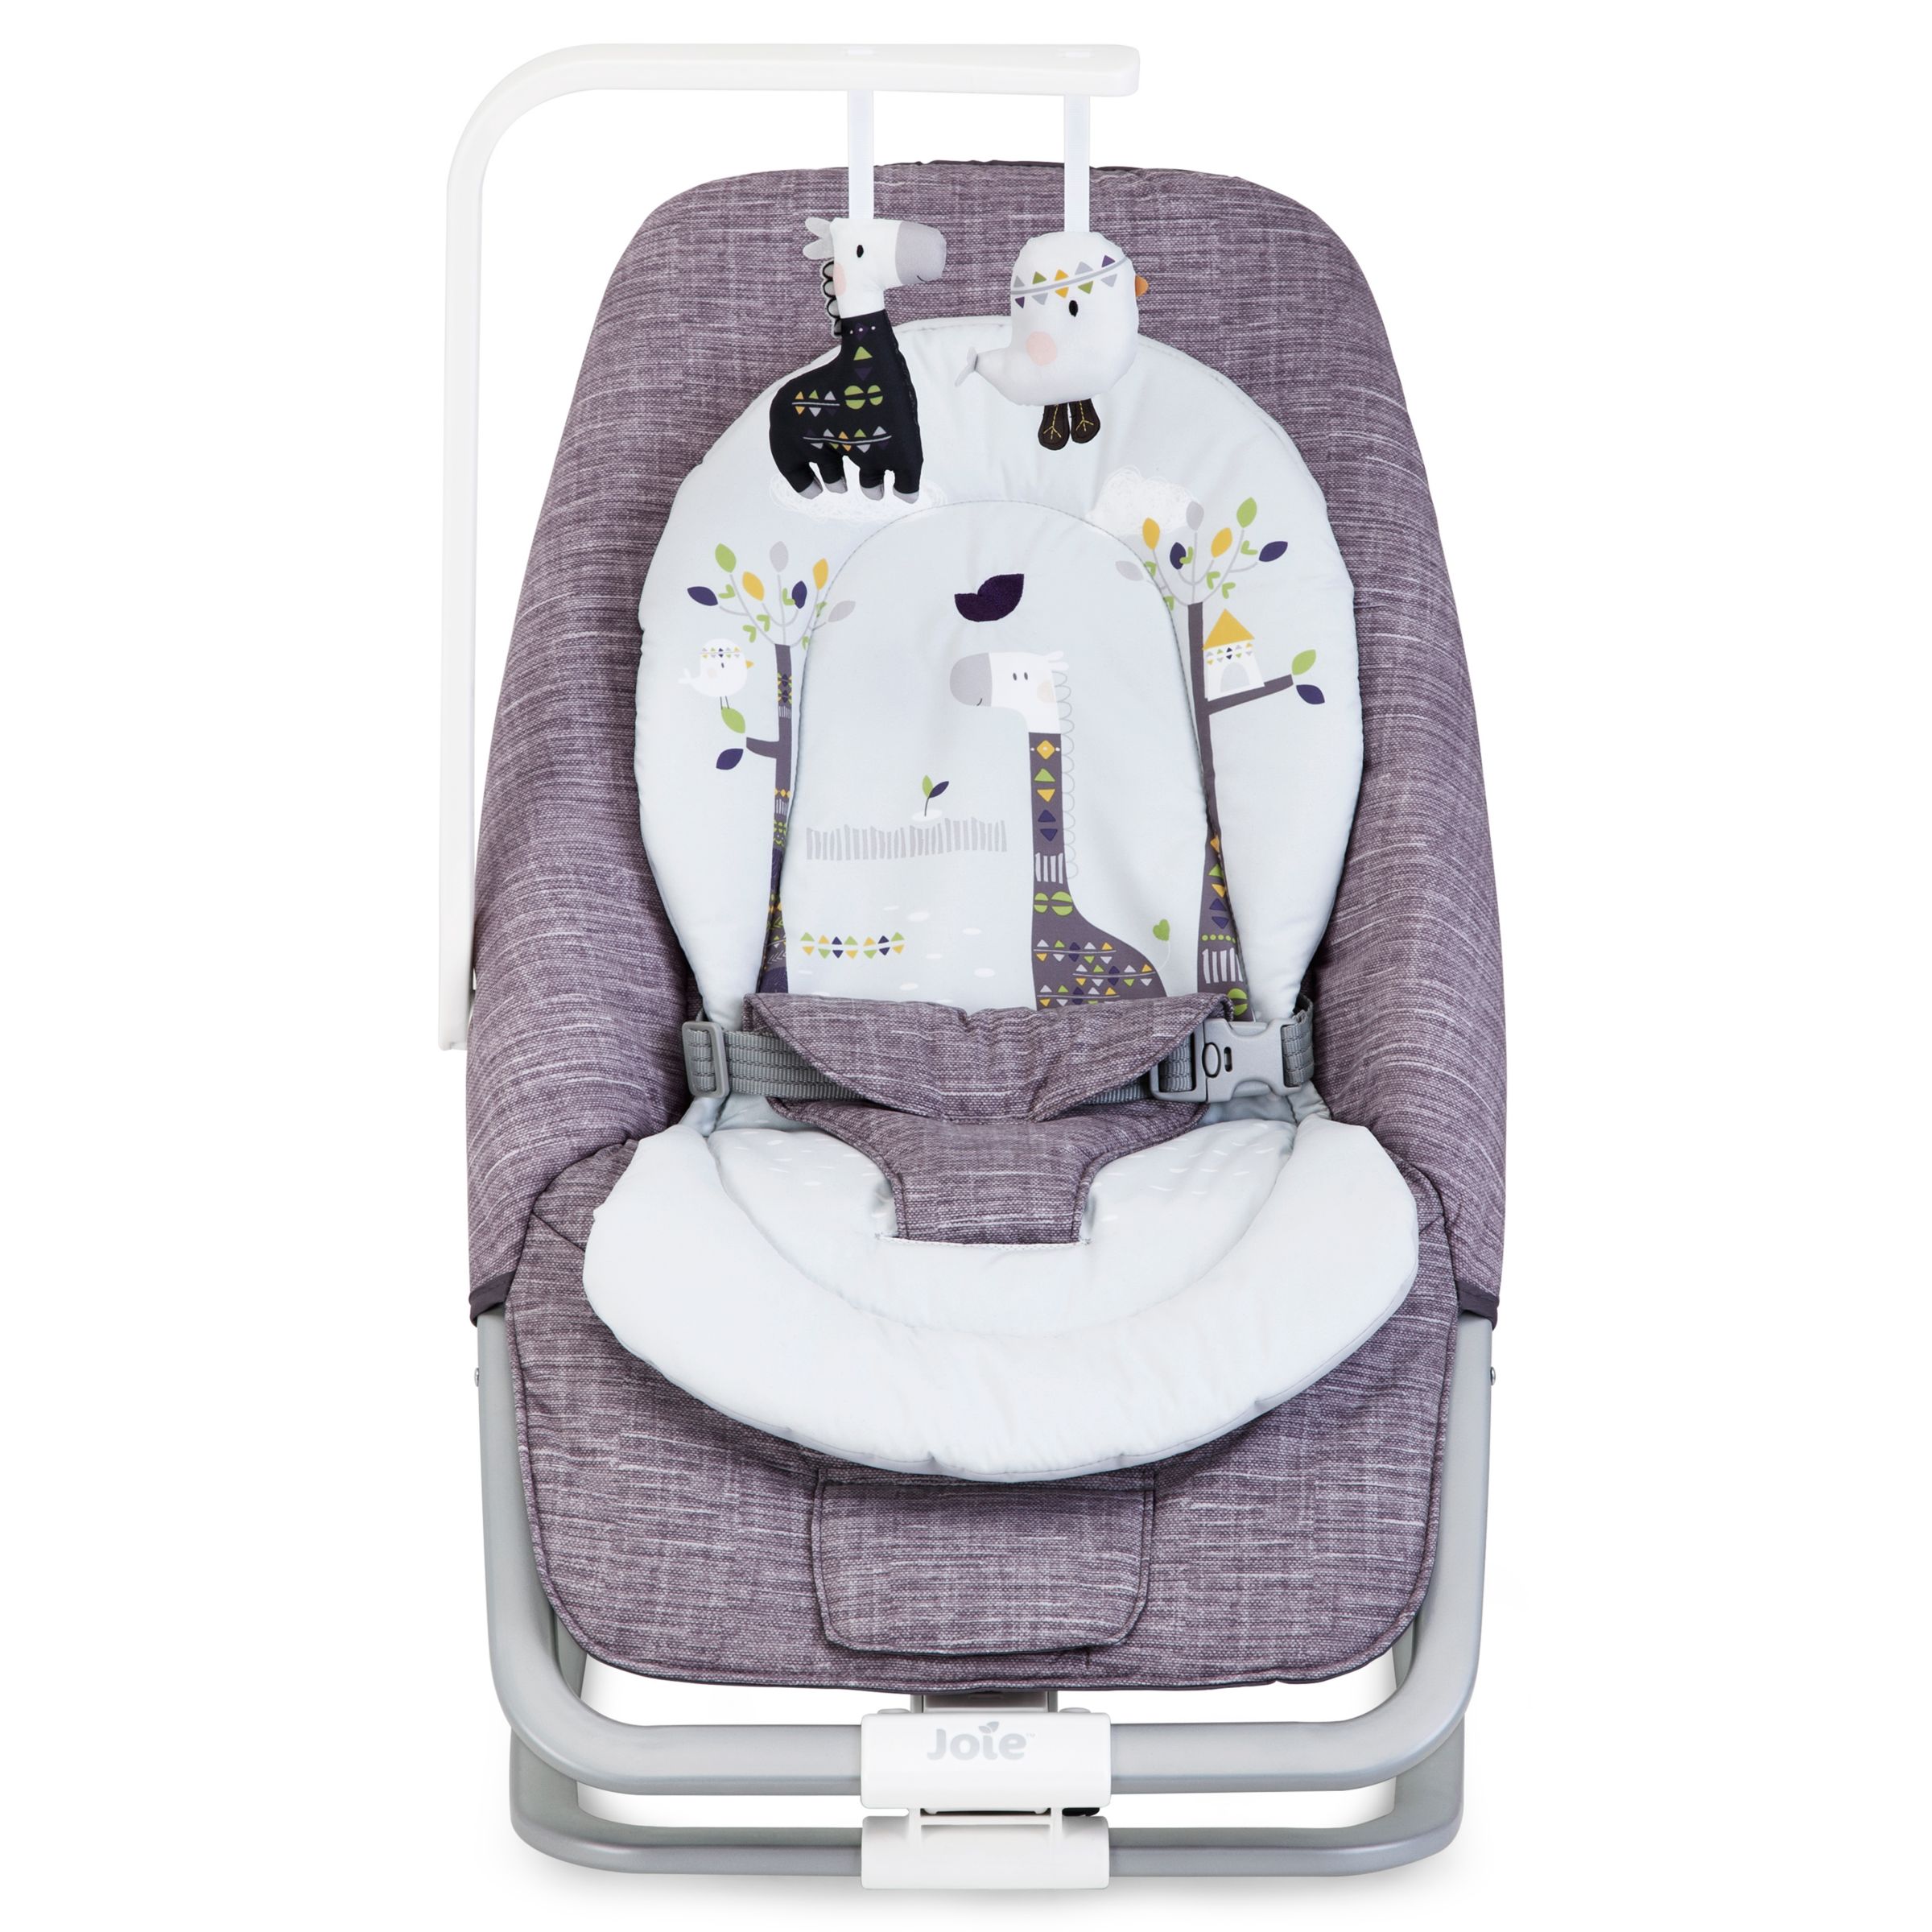 joie baby rocker and bouncer